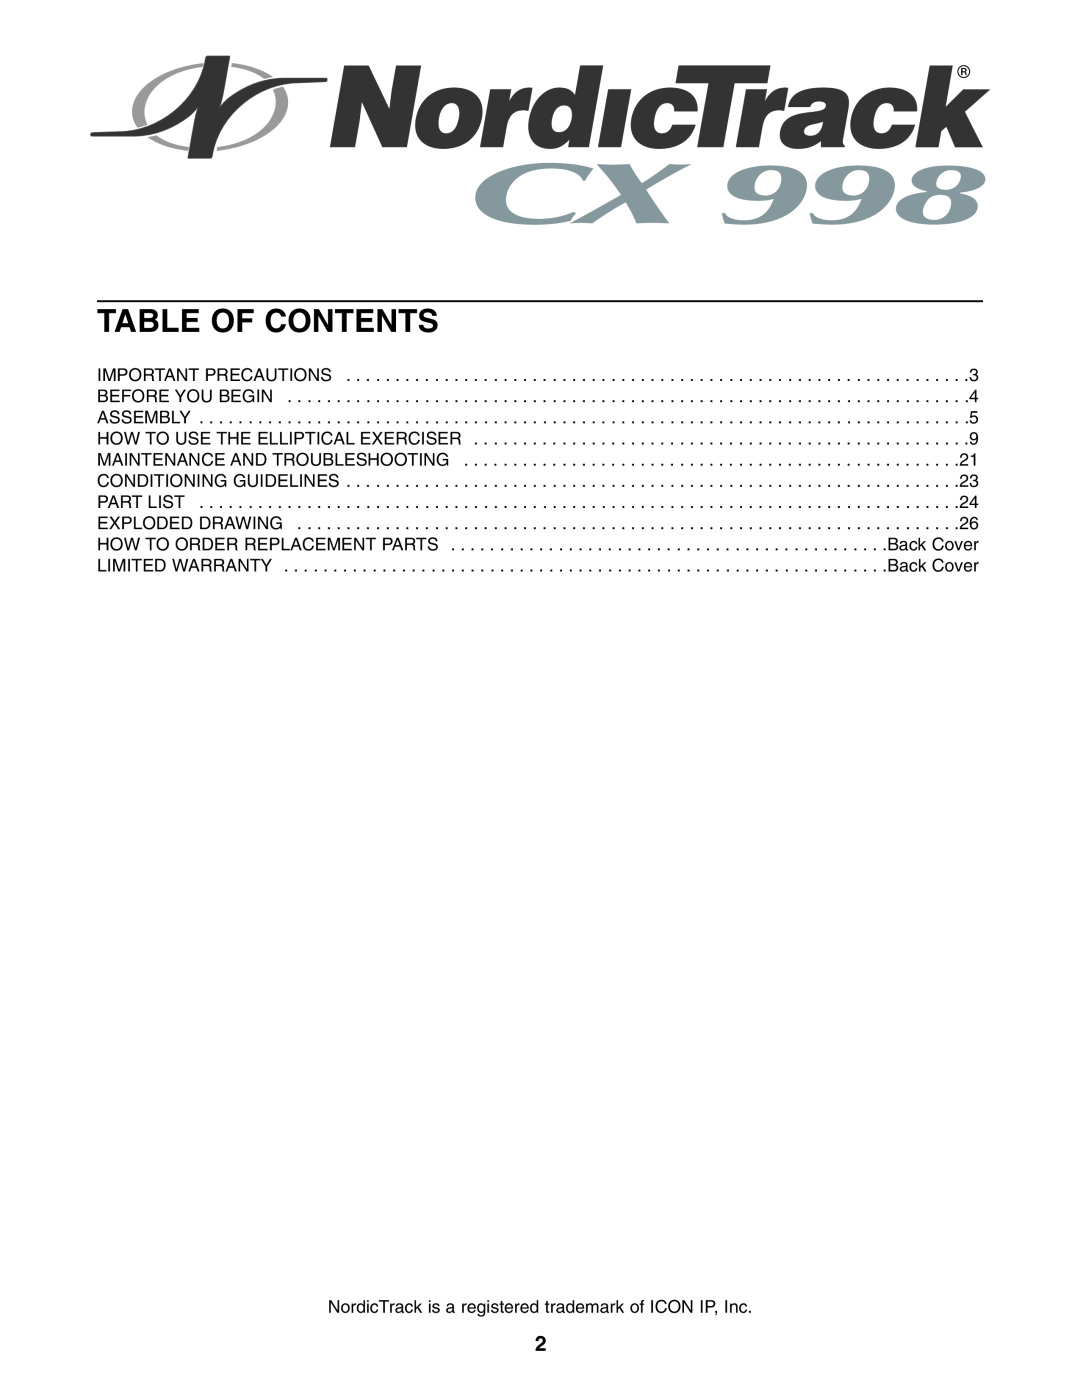 NordicTrack NEL7095.1 user manual Table Of Contents, NordicTrack is a registered trademark of ICON IP, Inc 